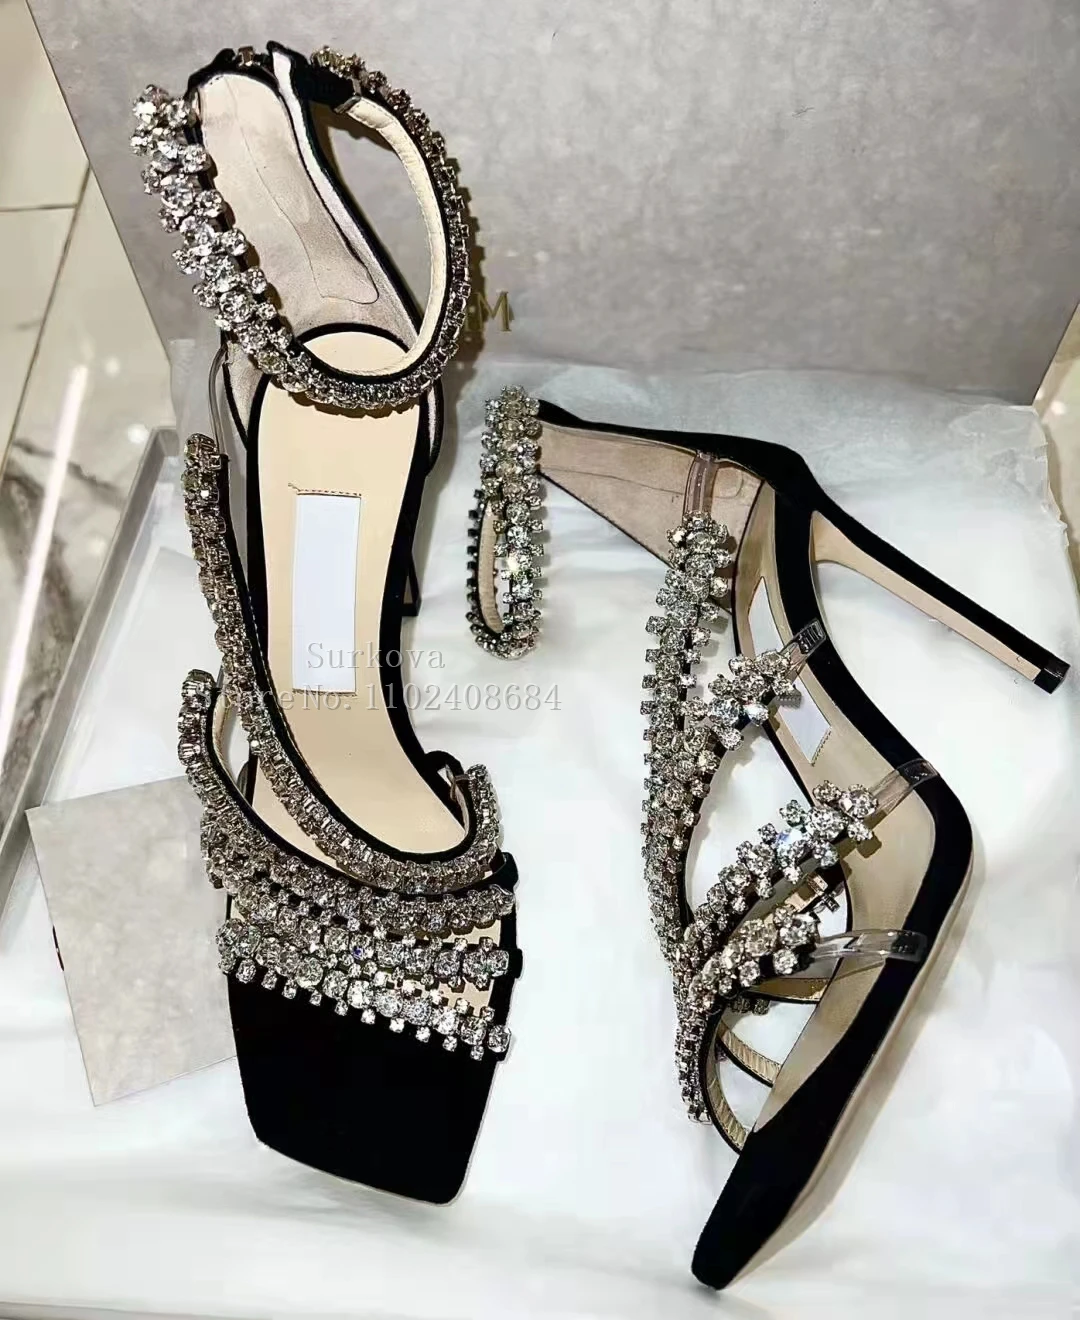 

Black Suede Crystal Embellished Strappy Sandals Fashion Thin High Heels Open Toe Pumps Summer Bling Bling Zipper Gladiator Shoes